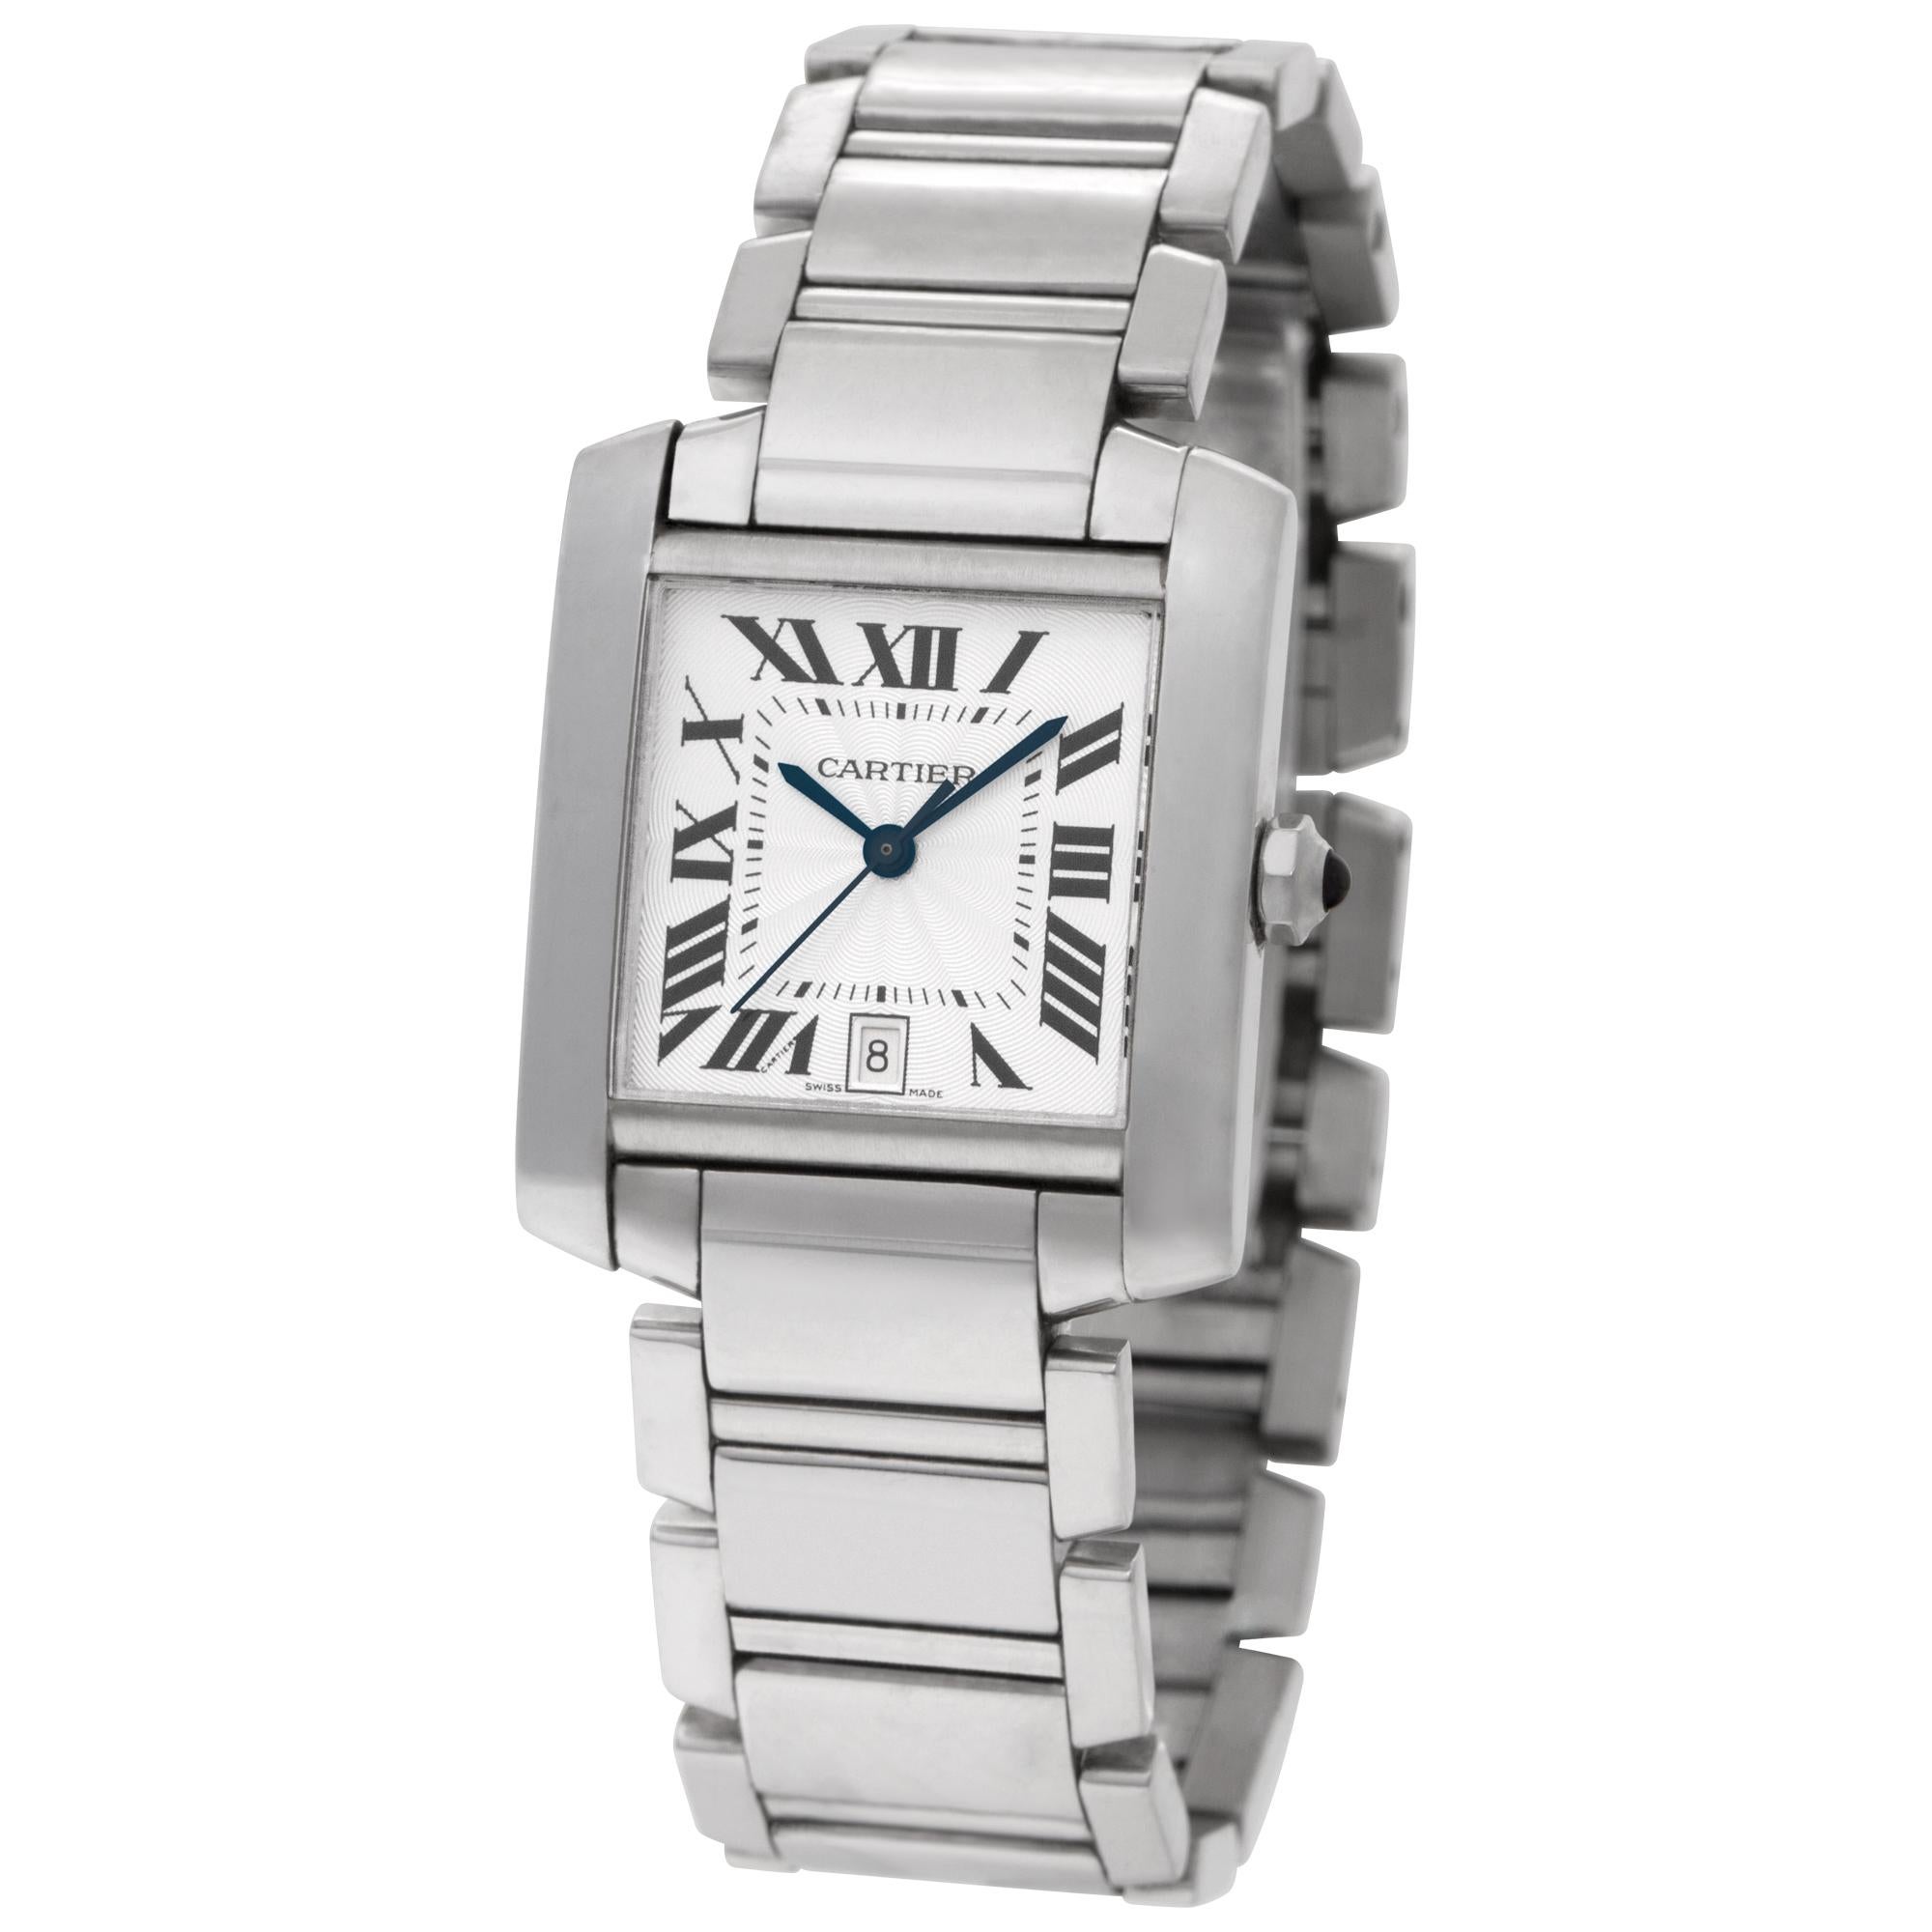 Cartier Tank Francaise in 18k white gold. Auto w/ sweep seconds and date. 28 mm case size. With box and papers. Ref W50011S3. Circa 2002. Fine Pre-owned Cartier Watch. Certified preowned Dress Cartier Tank Francaise W50011S3 watch is made out of